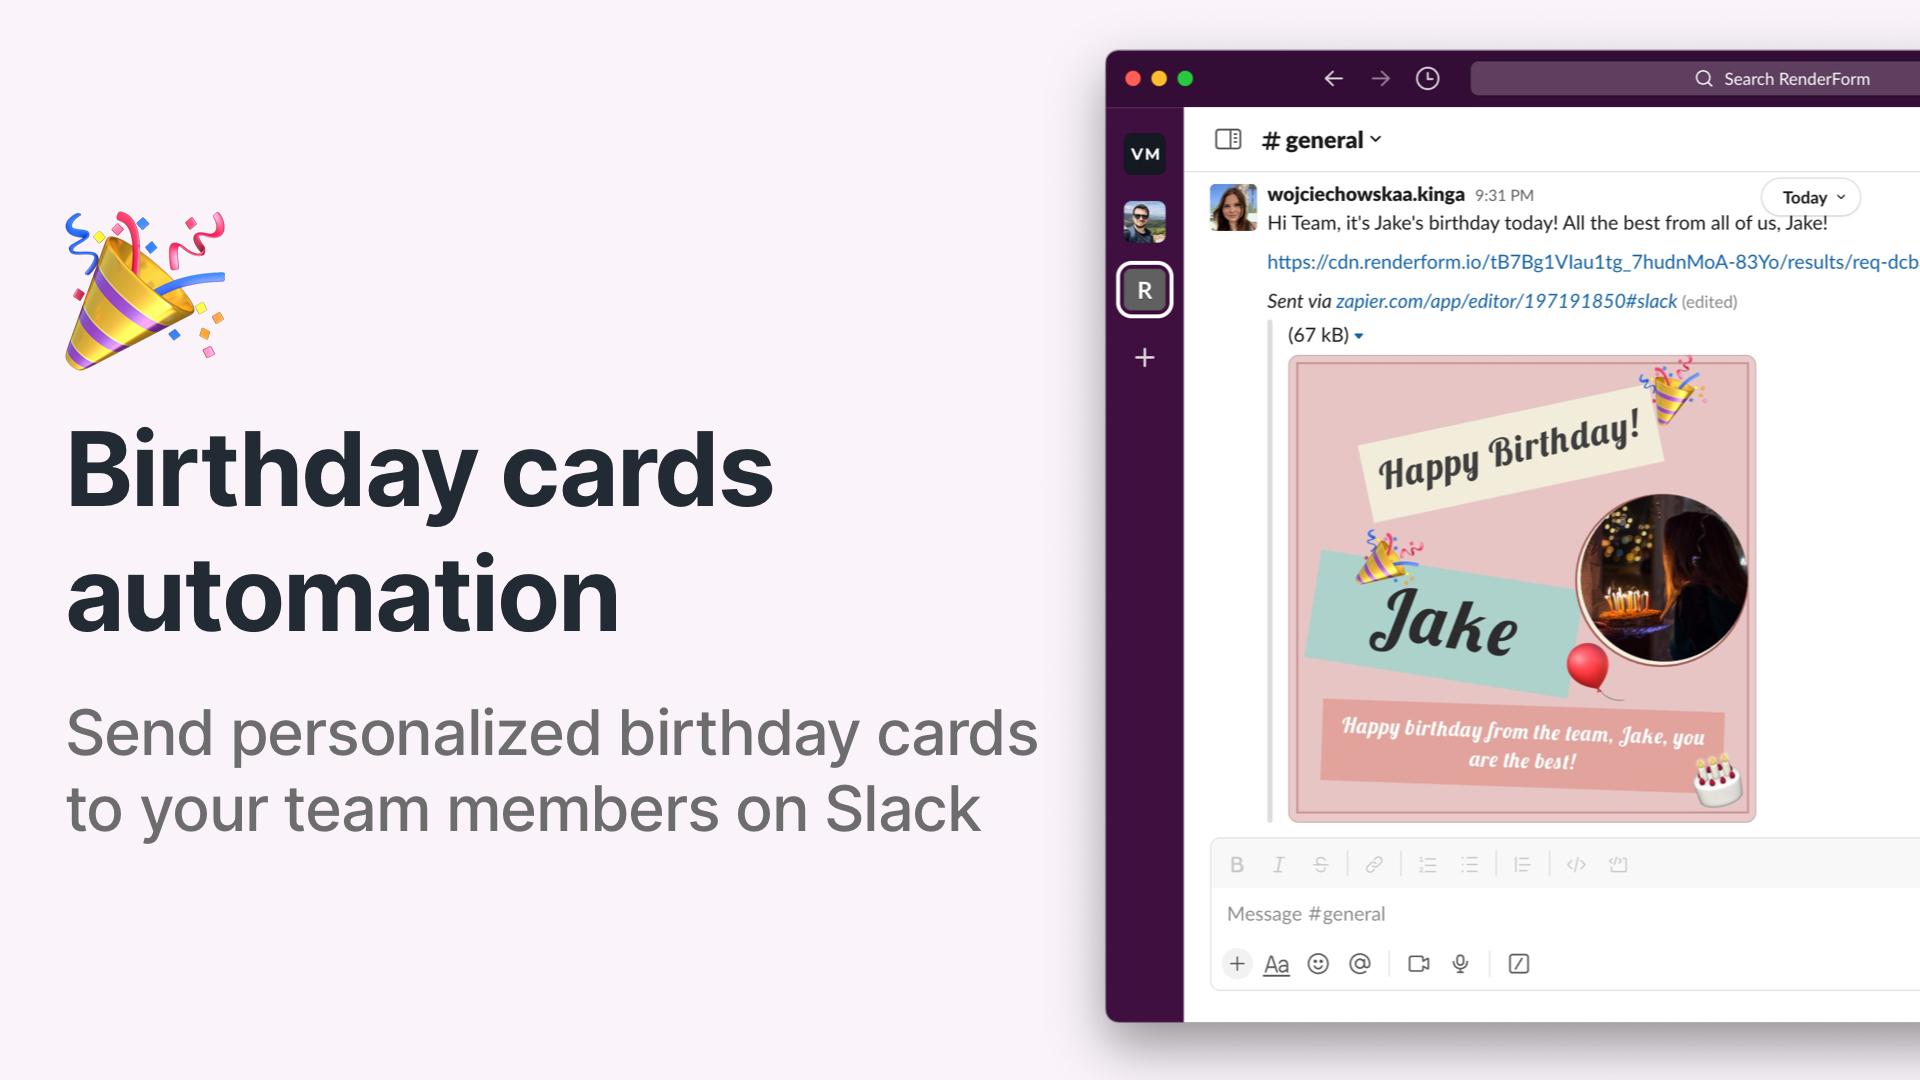 Automate sending birthday cards to your team members